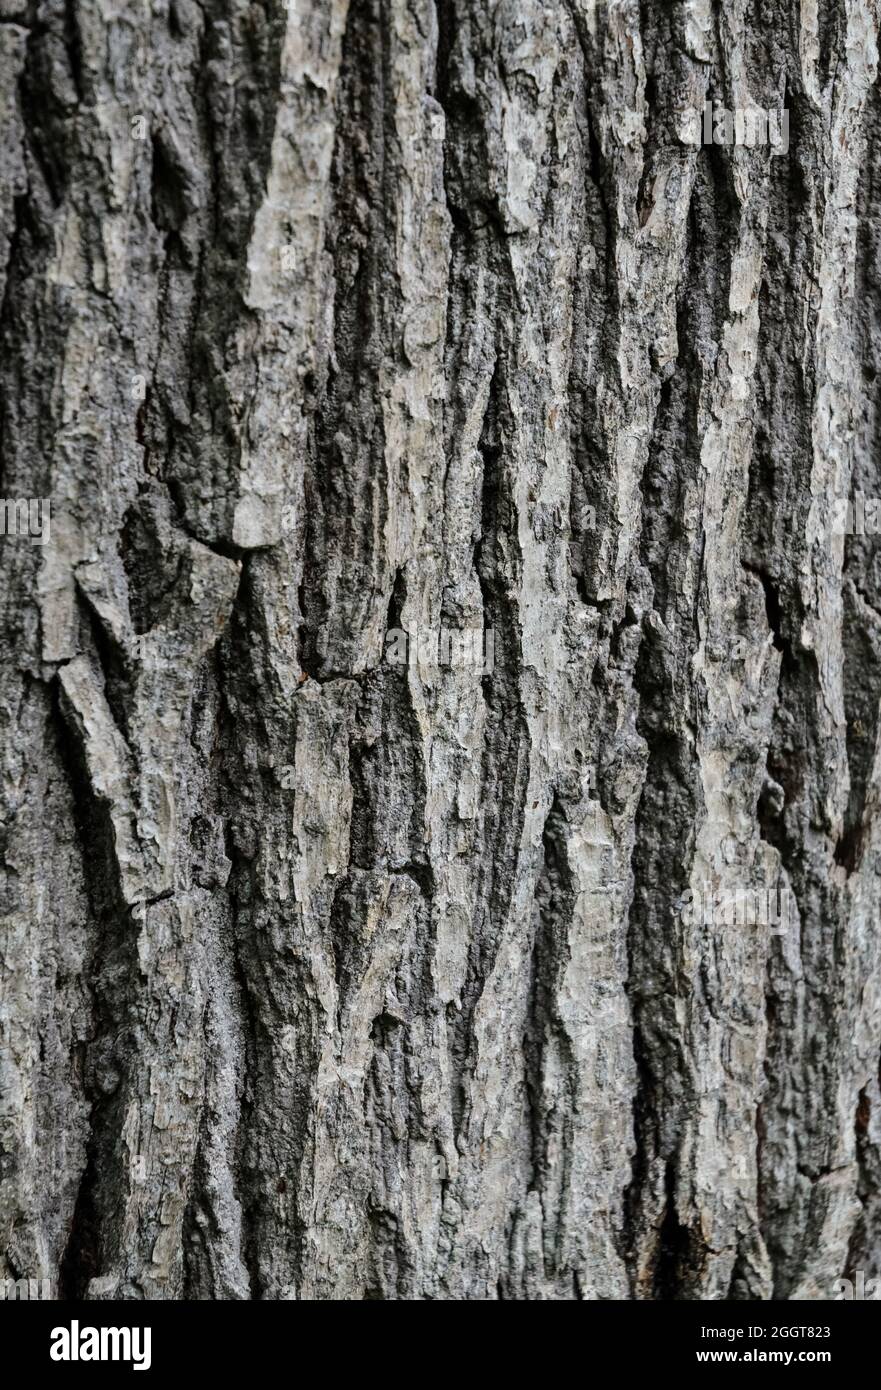 Close-up view of weathered outer bark of an oak tree (Quercus) with different layers, cracks and lines, abstract natural texture or background Stock Photo